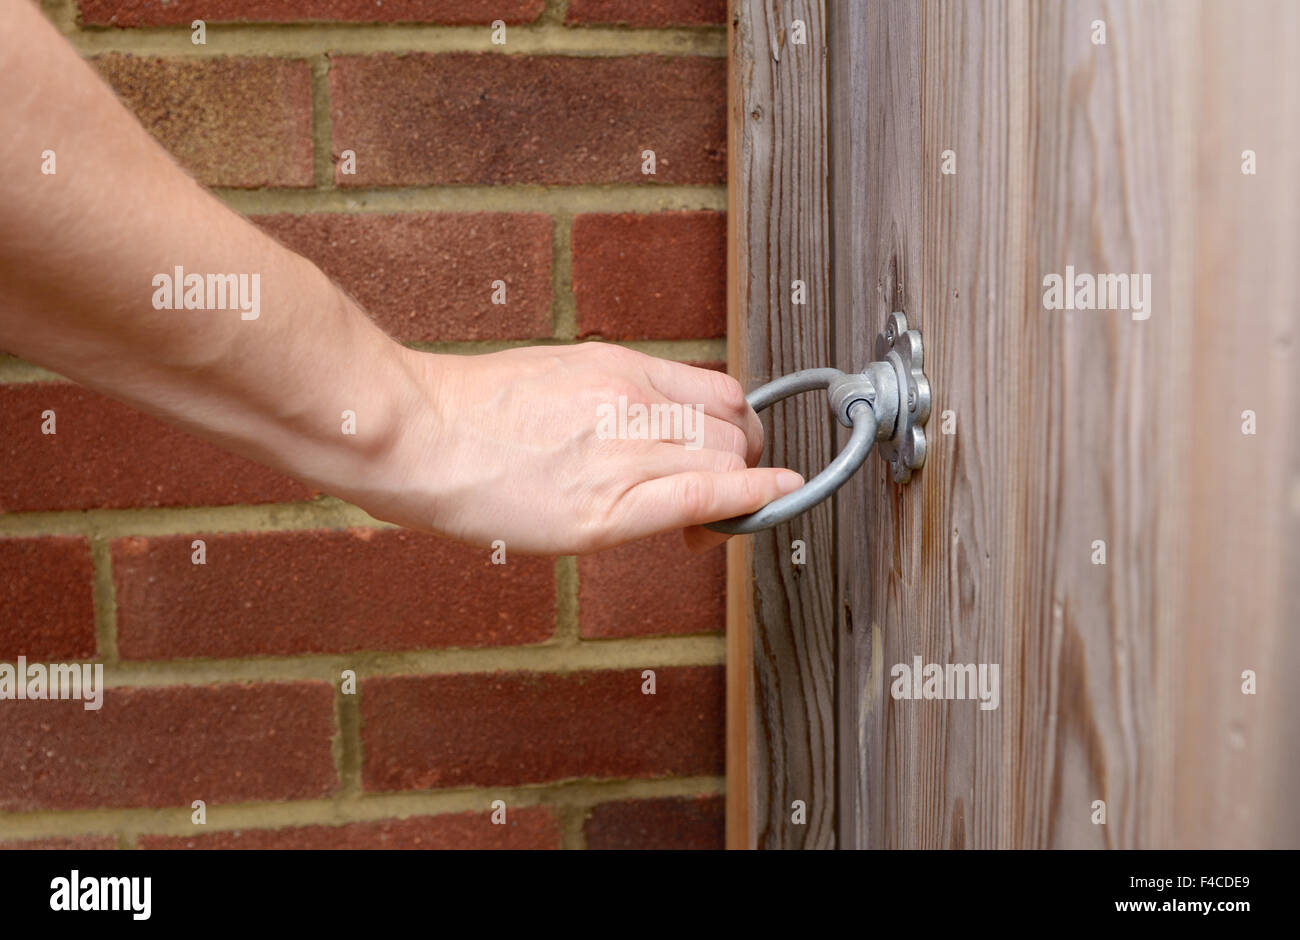 Woman turns a metal ring handle to open a wooden garden gate Stock Photo